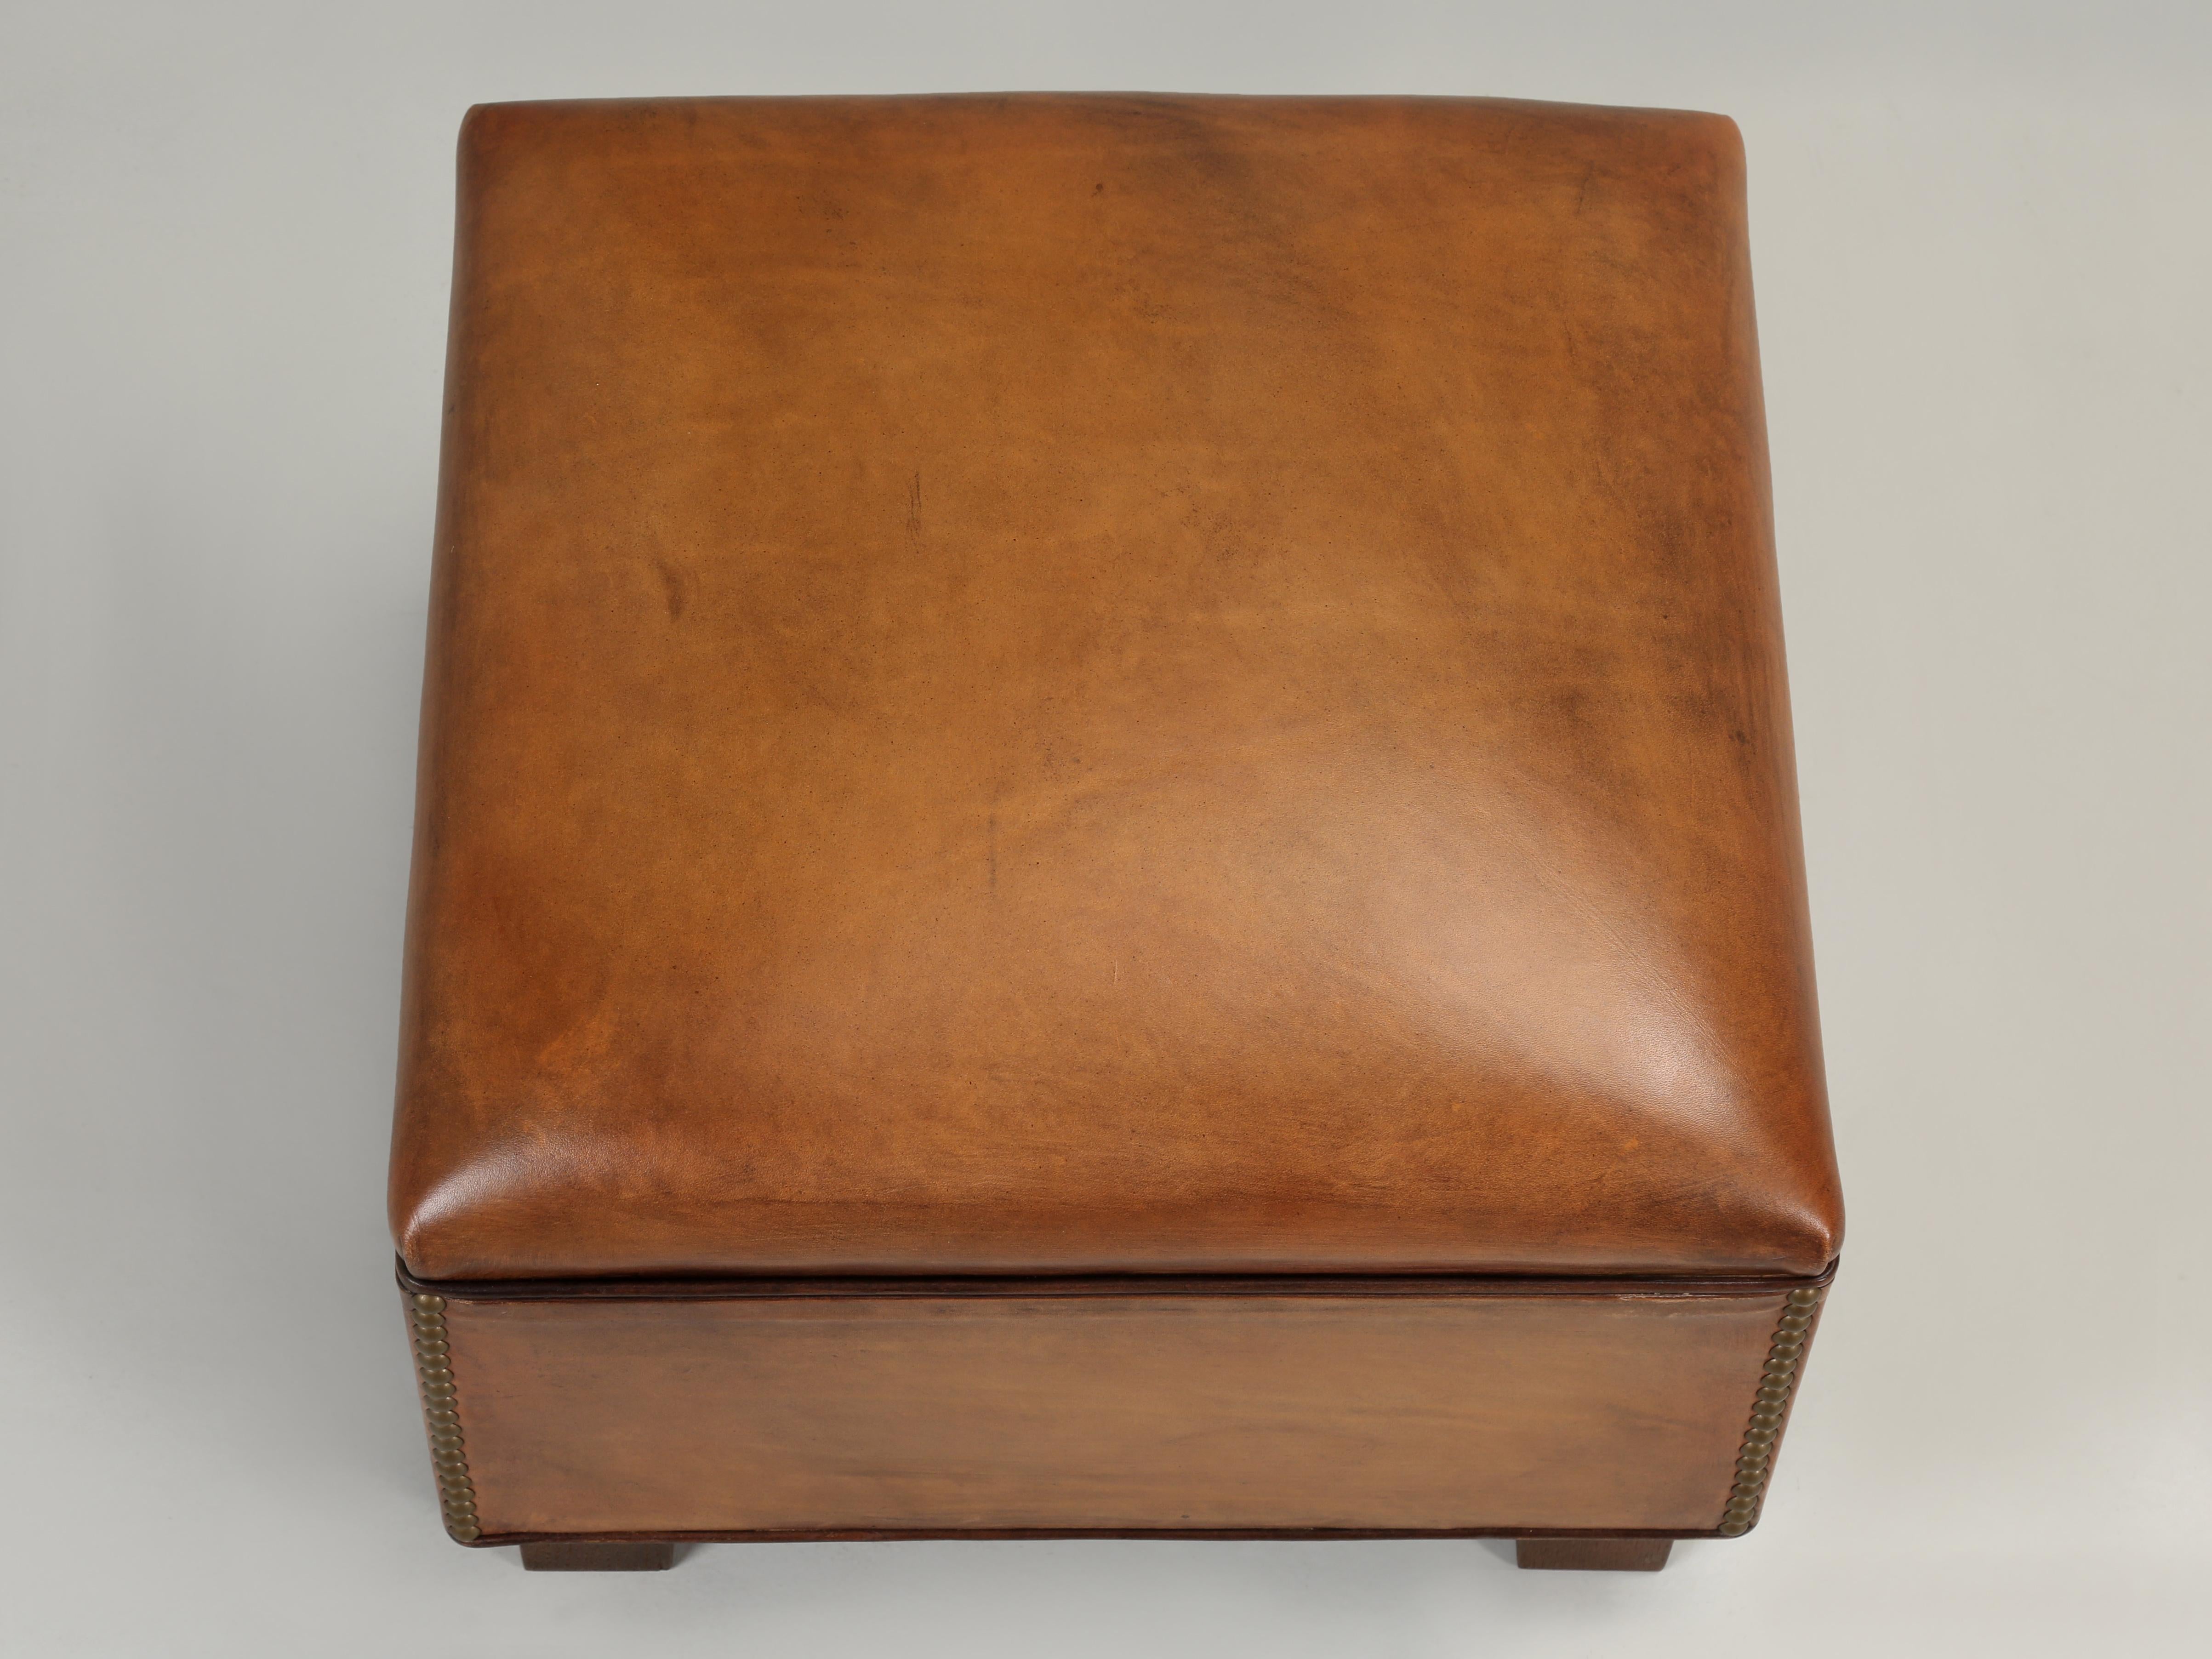 Ottoman, Custom Made inhouse to pair with French Leather Club Chairs or whatever. Available in an infinite array of colors, fabrics and of course in any dimension. Typically, you would see these Leather Ottomans with matching French Leather Club